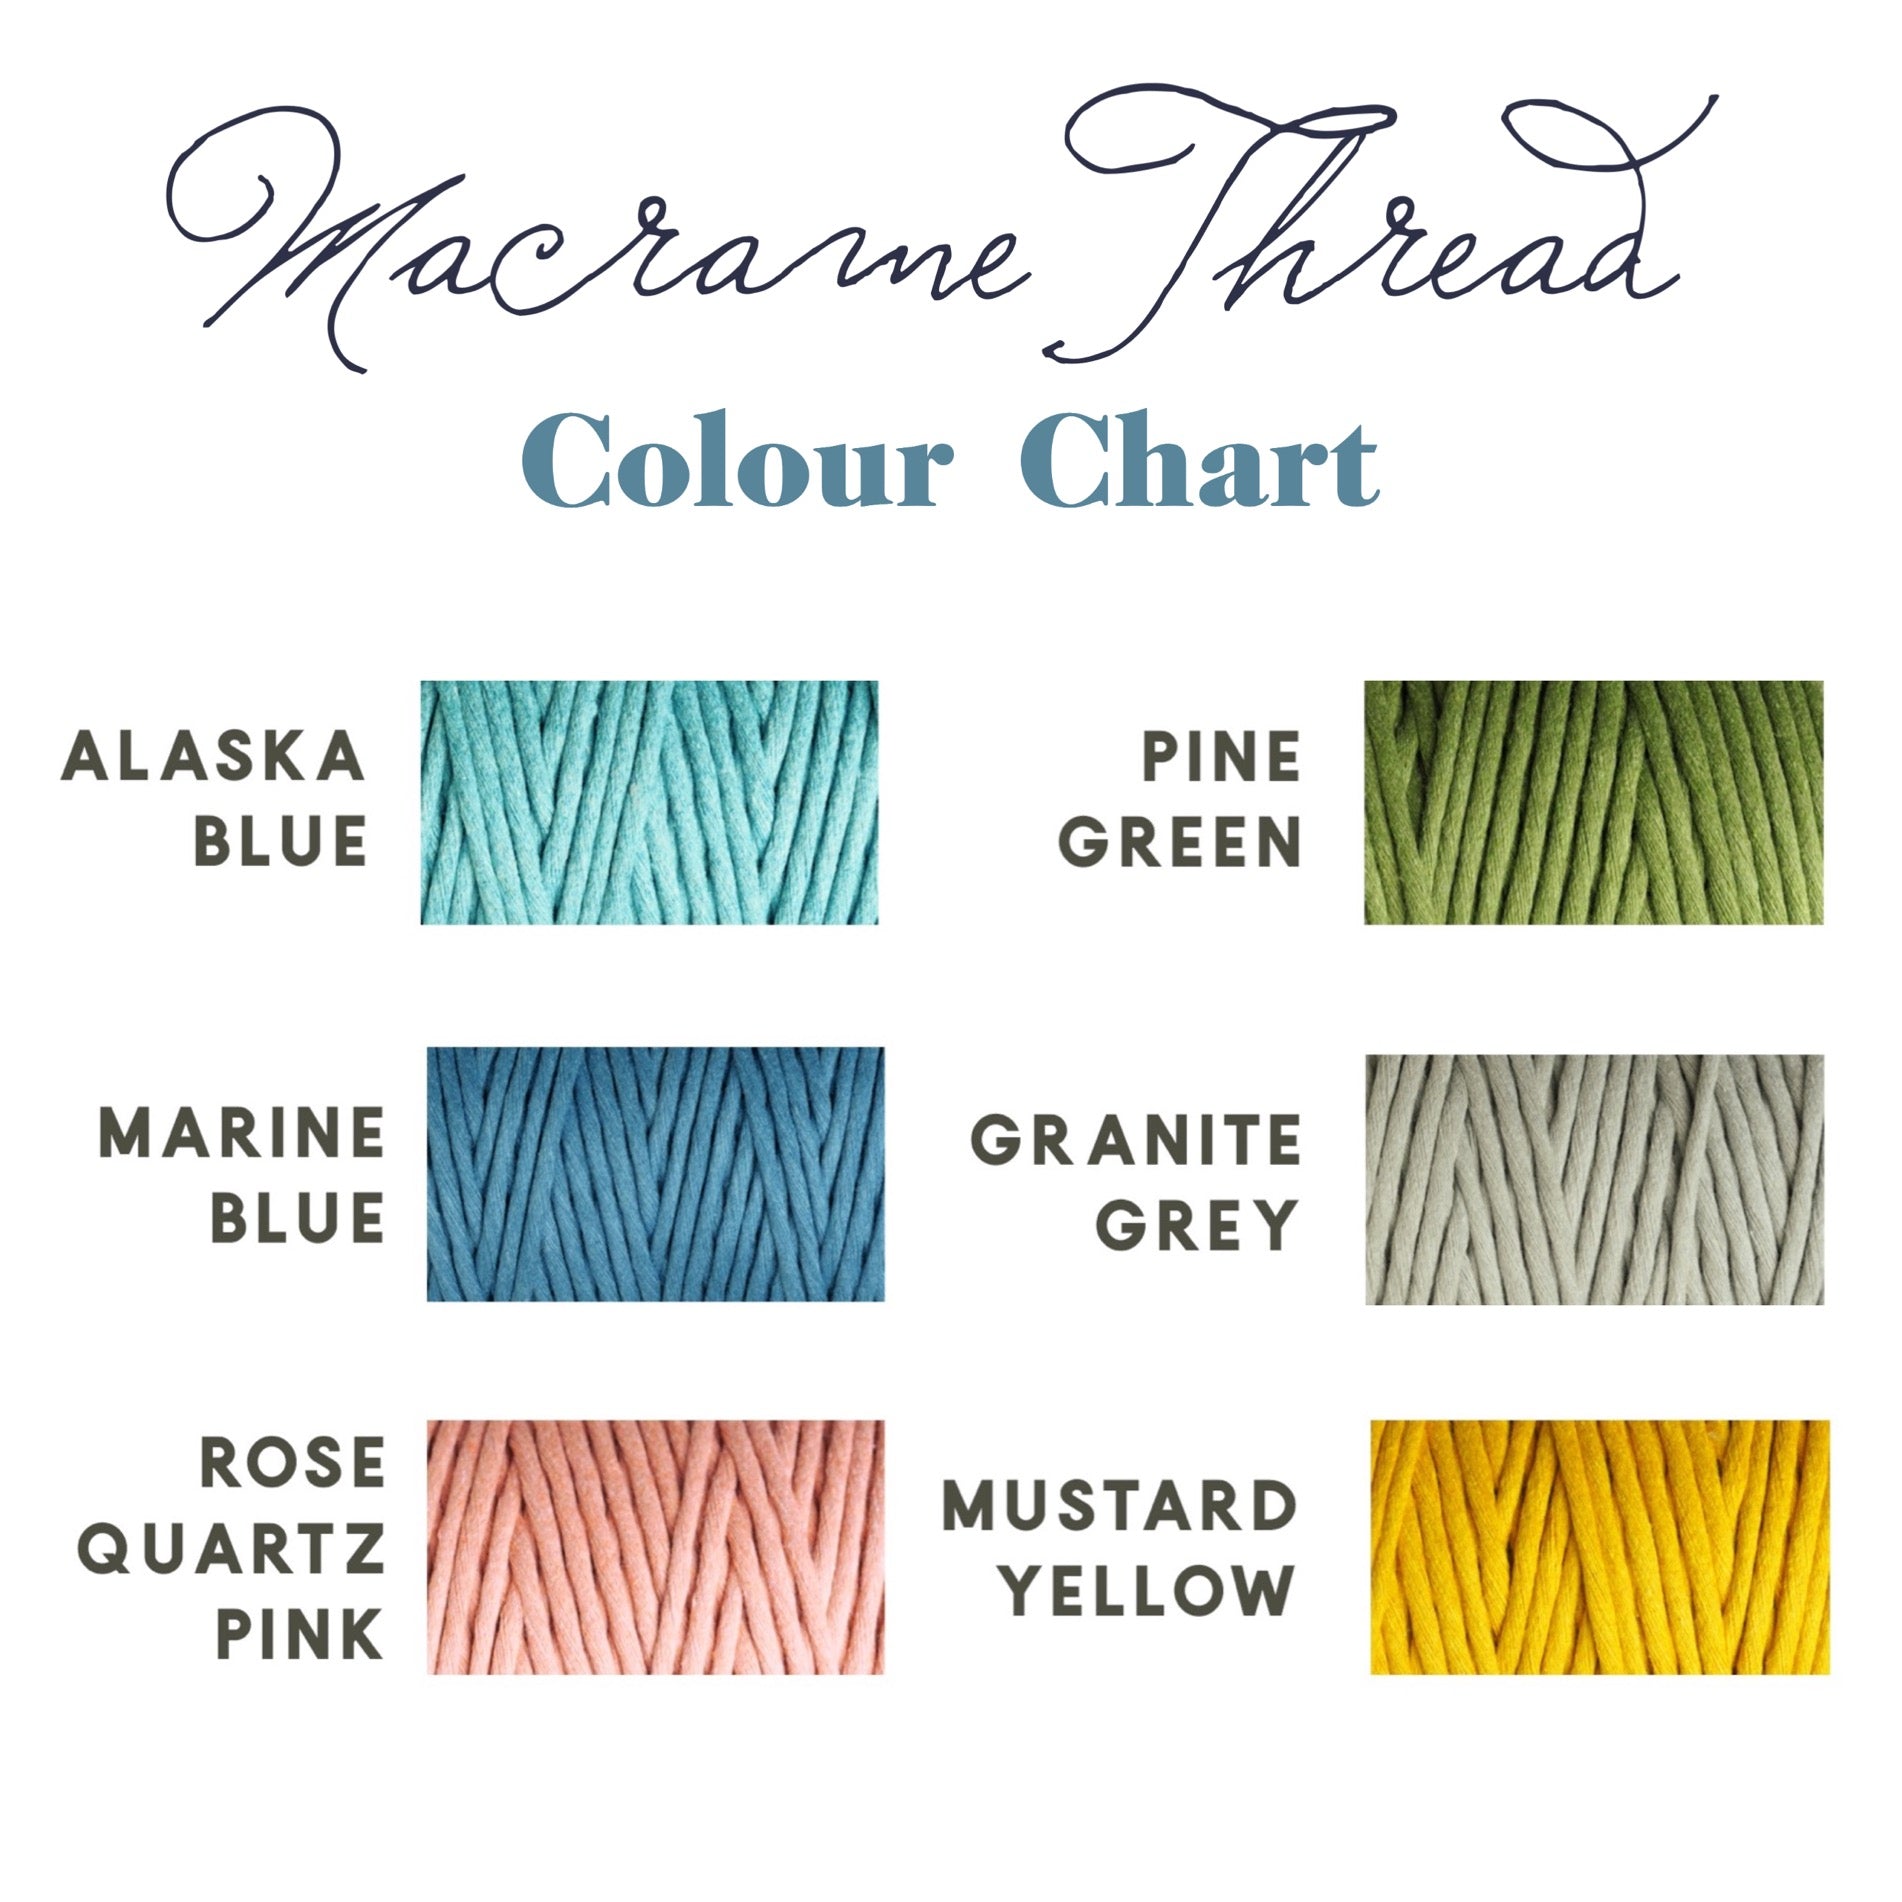 Macrame recycled thread colour chart